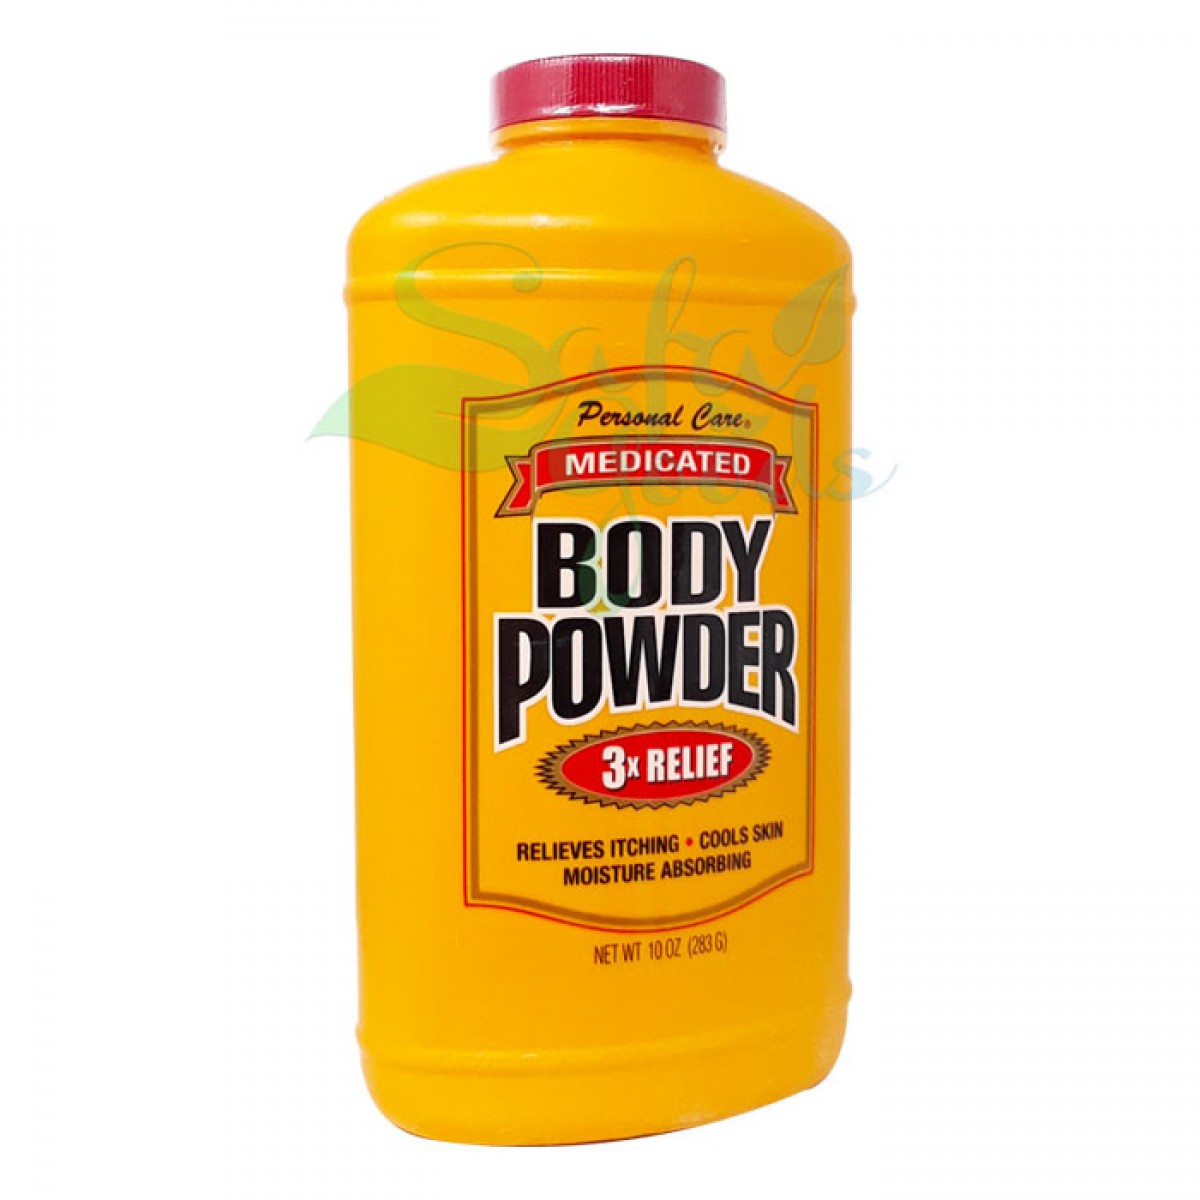 Personal Care Medicated Body Powder